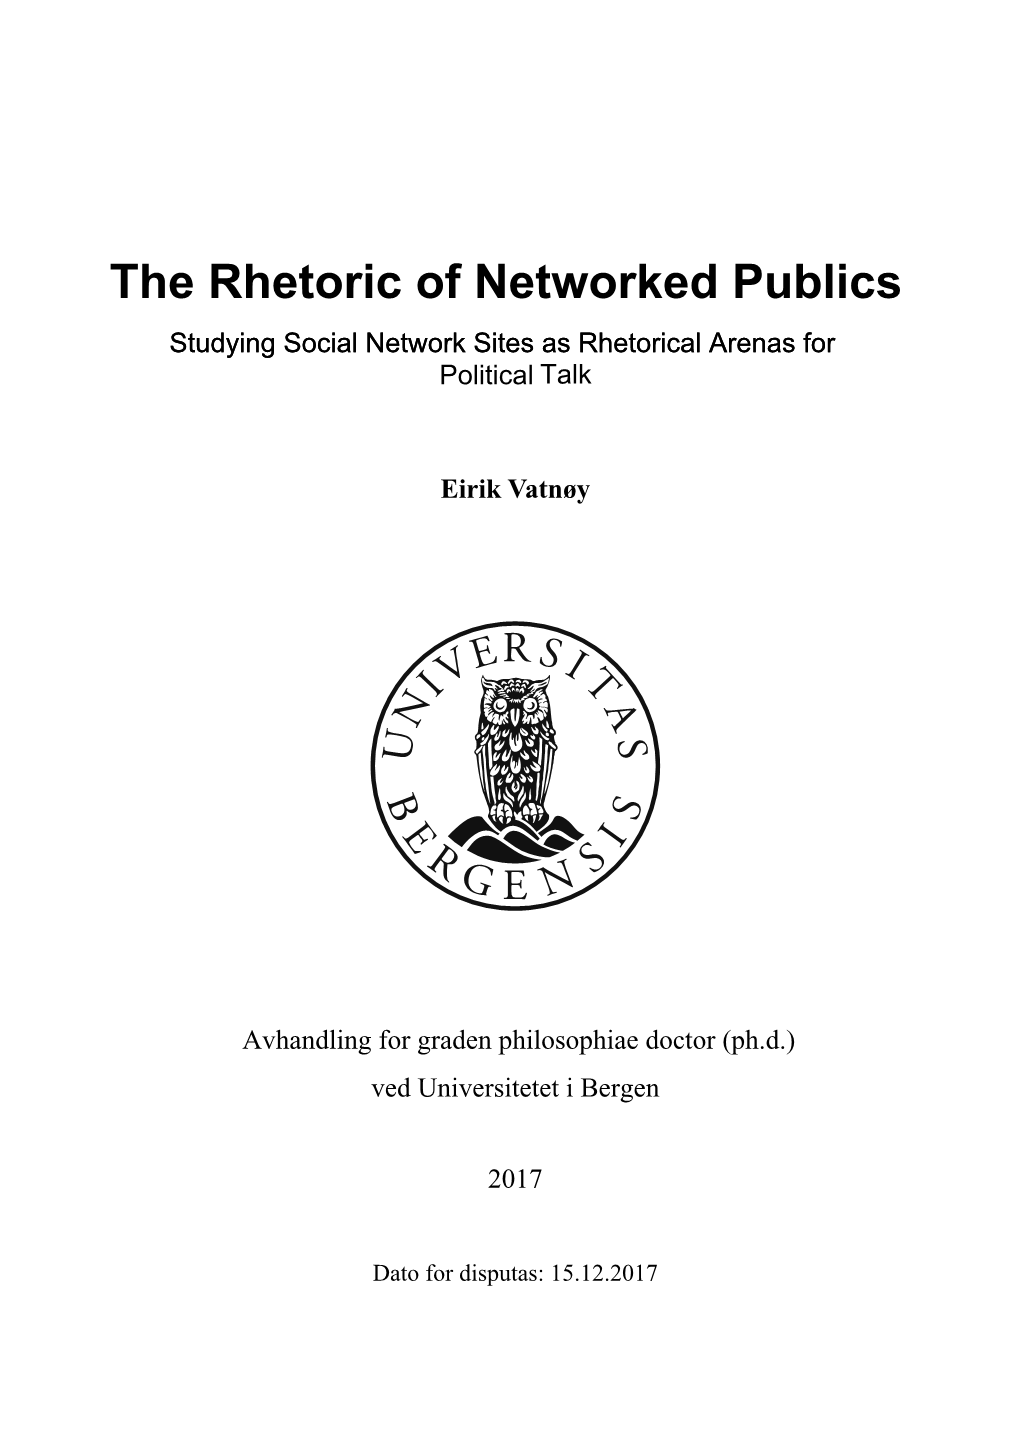 The Rhetoric of Networked Publics by Studying the Practices and Experiences of Expert Citizens on Twitter and Facebook in Norway